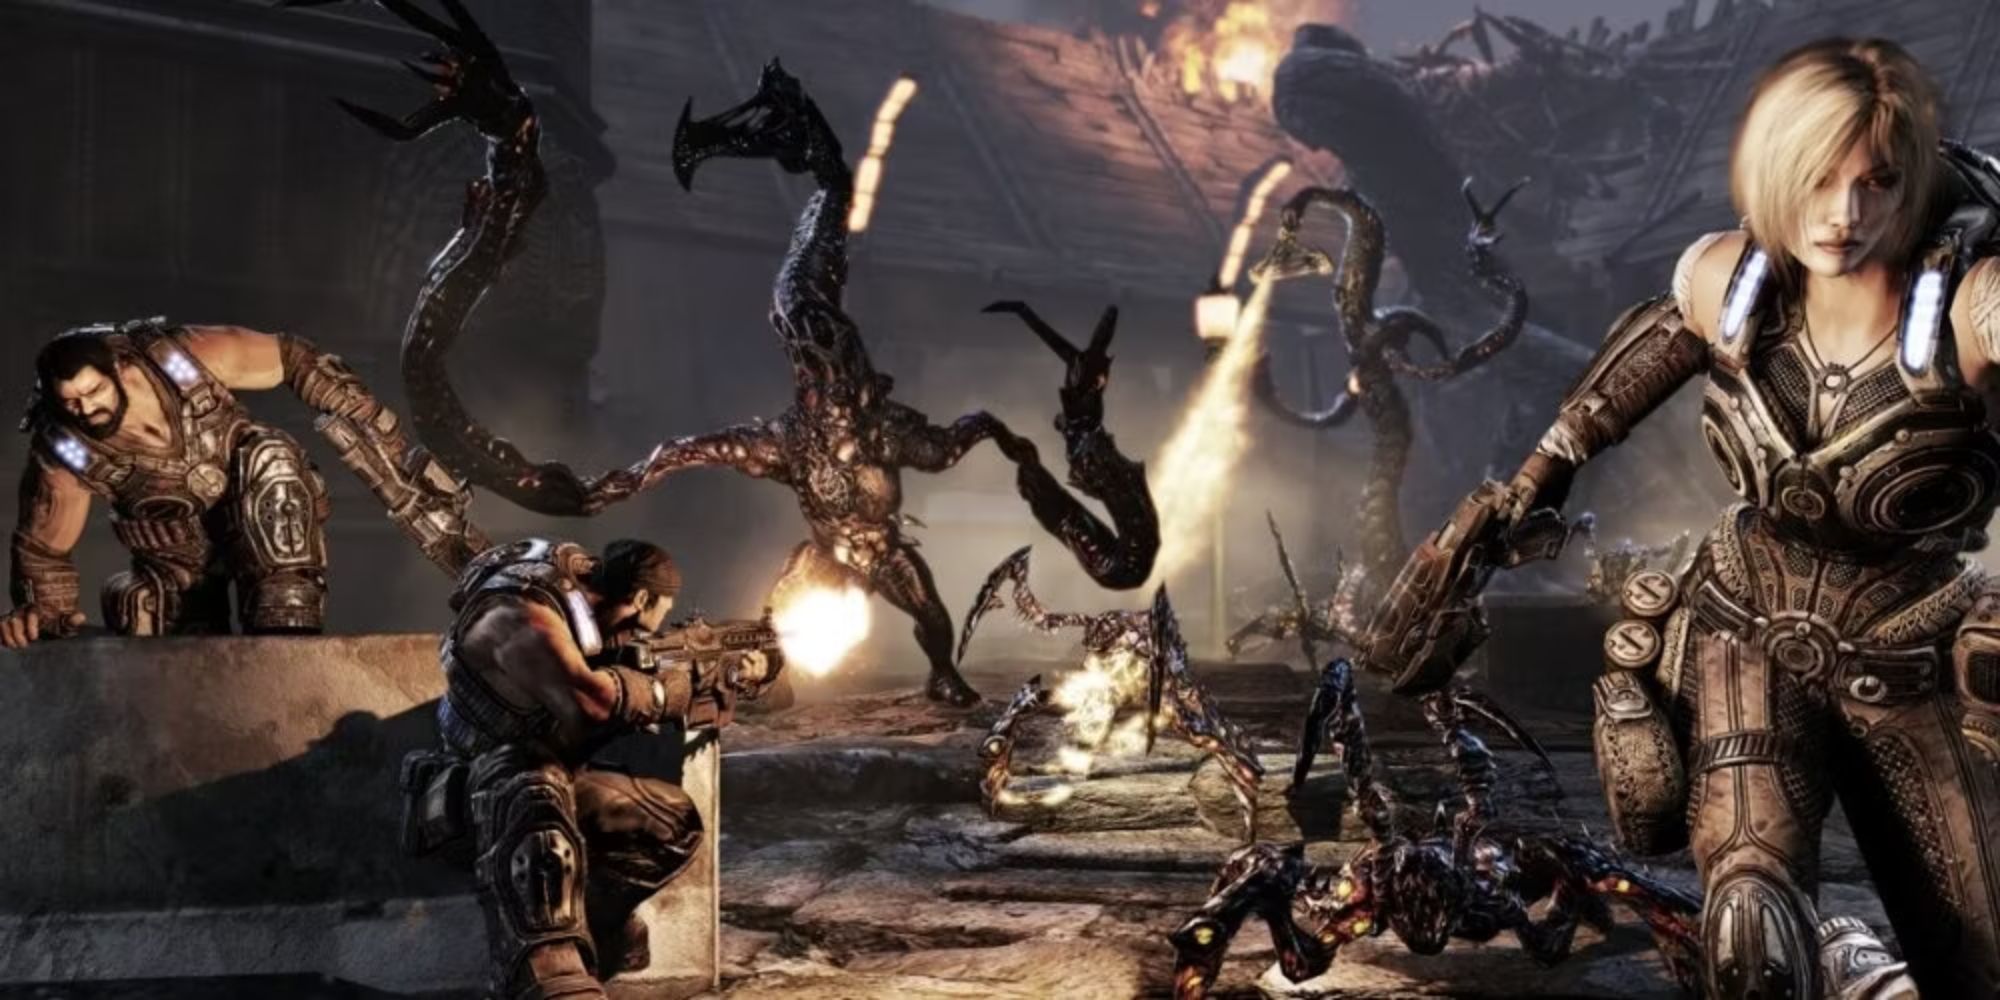 gears of war 3 fighting enemies from cover